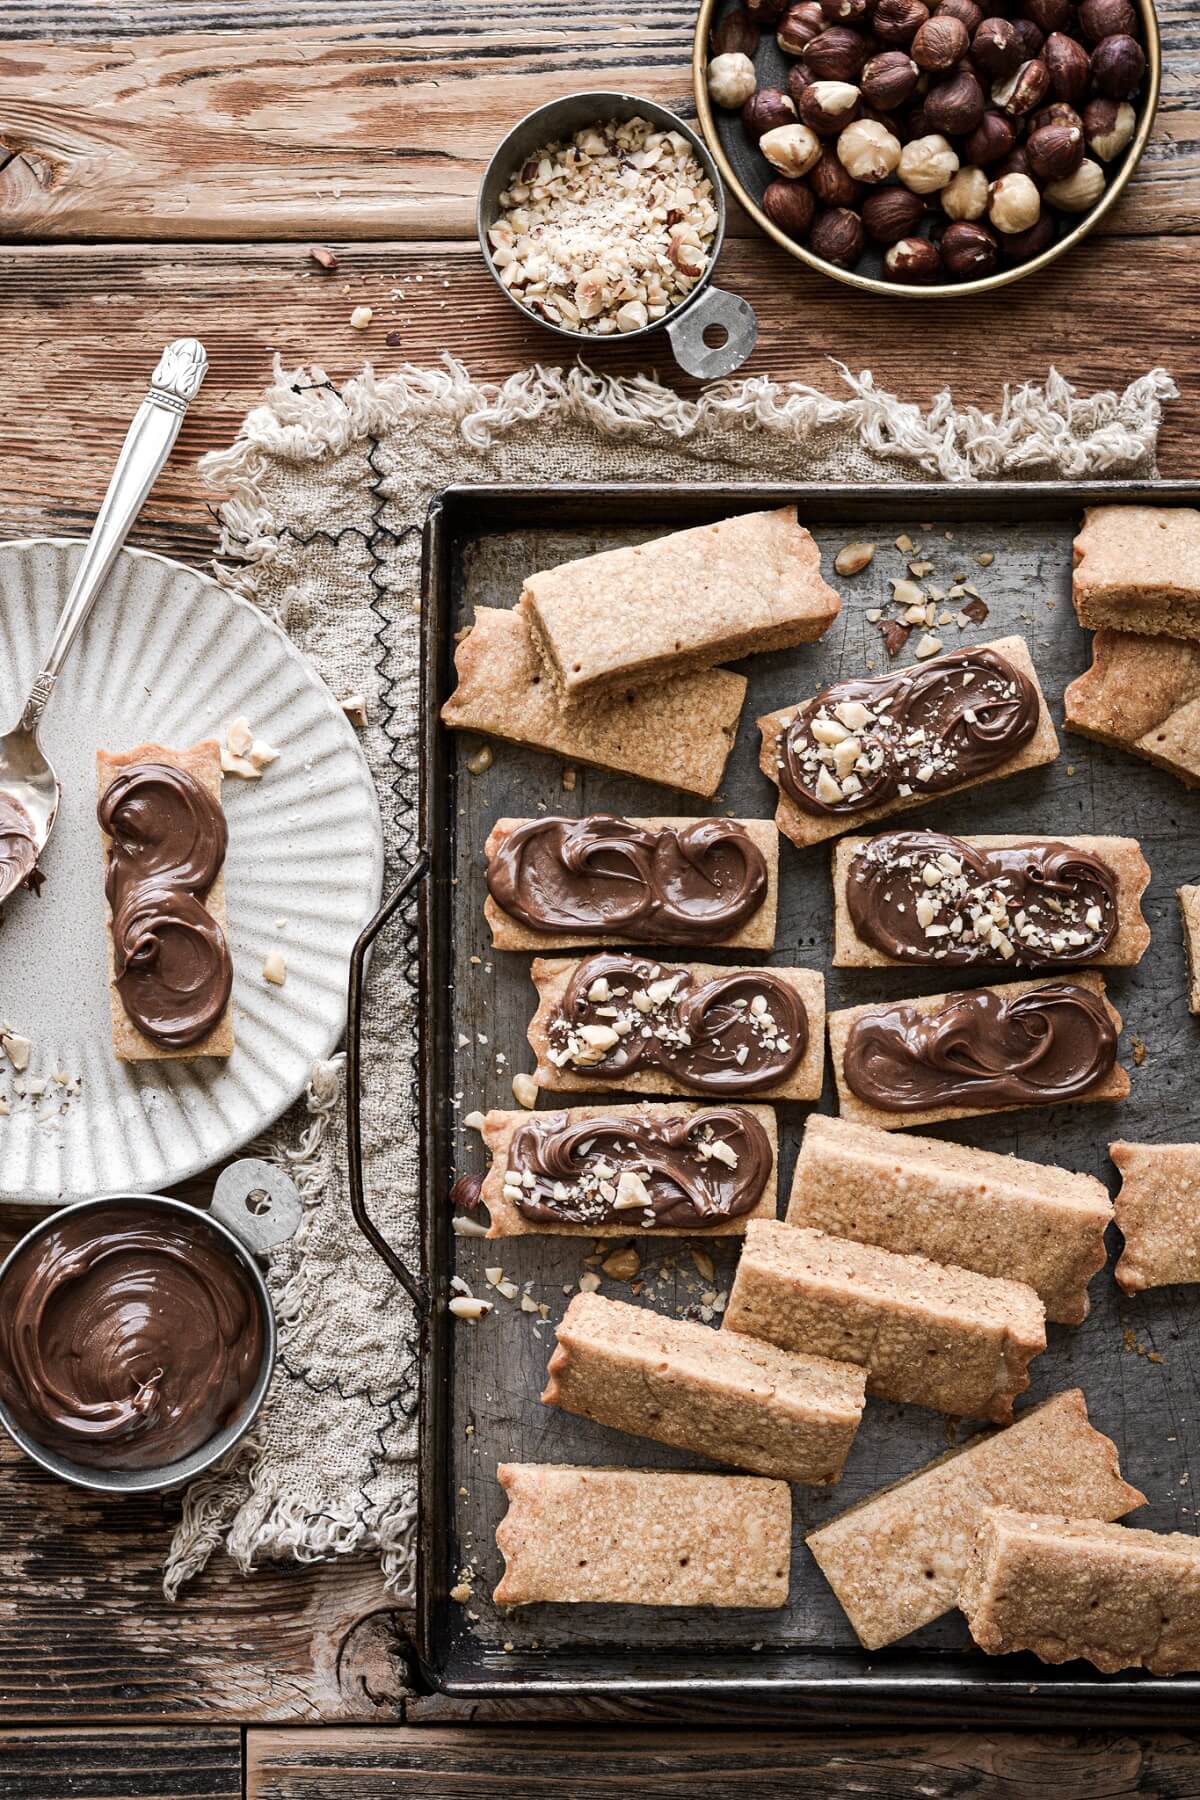 Hazelnut shortbread spread with Nutella and sprinkled with chopped hazelnuts.